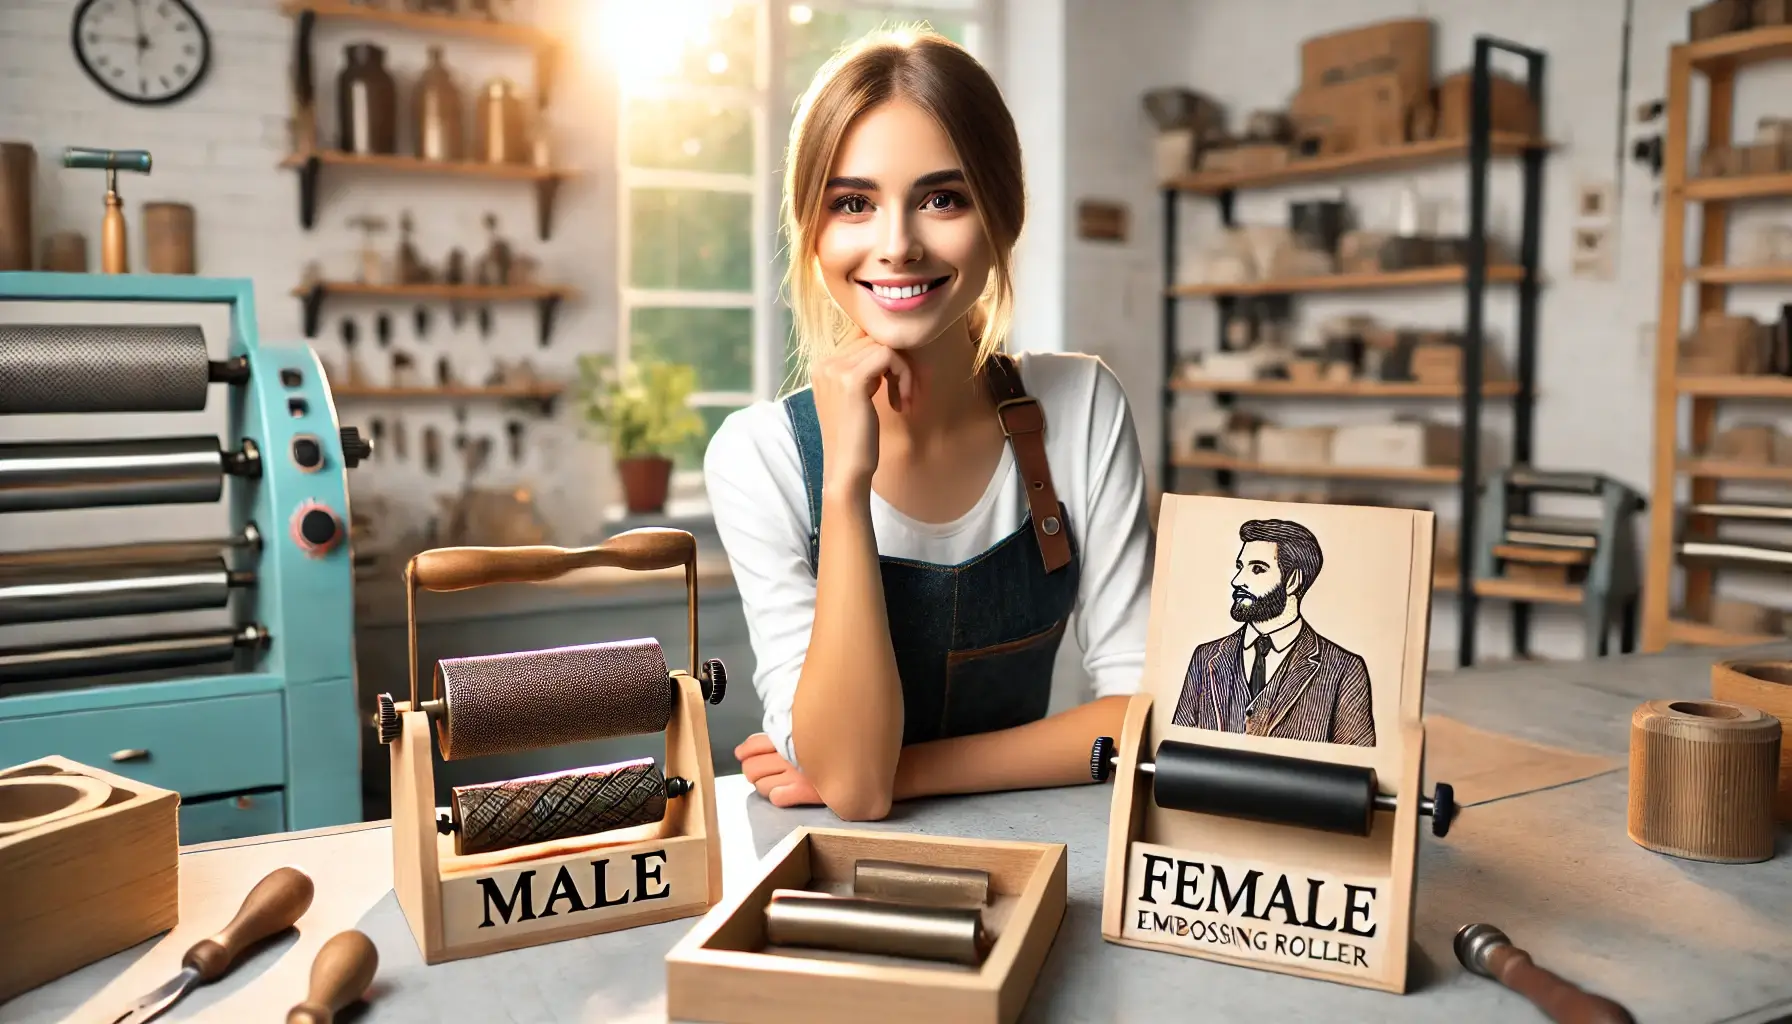 Feature image of a blog post showing a male and female embossing roller on a workbench, with a beautiful 21-year-old girl smiling beside them. The setting is a clean, well-lit workshop with organized shelves and embossing tools in the background. Light streams in through a window, giving the scene a warm and inviting feel.